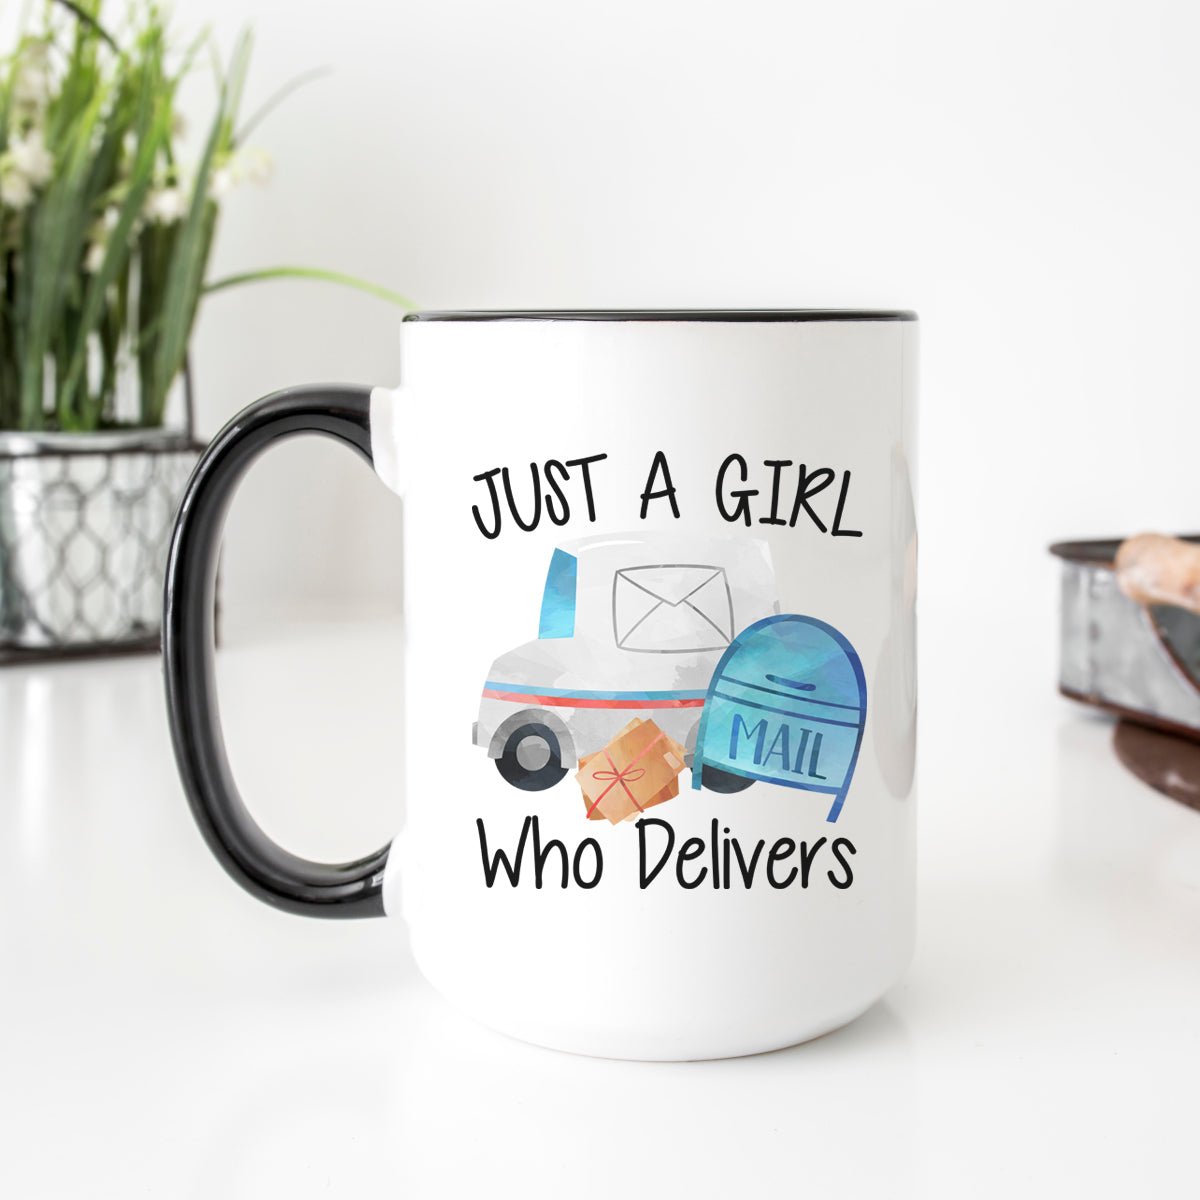 Just a Girl Who Delivers Mug - Zookaboo